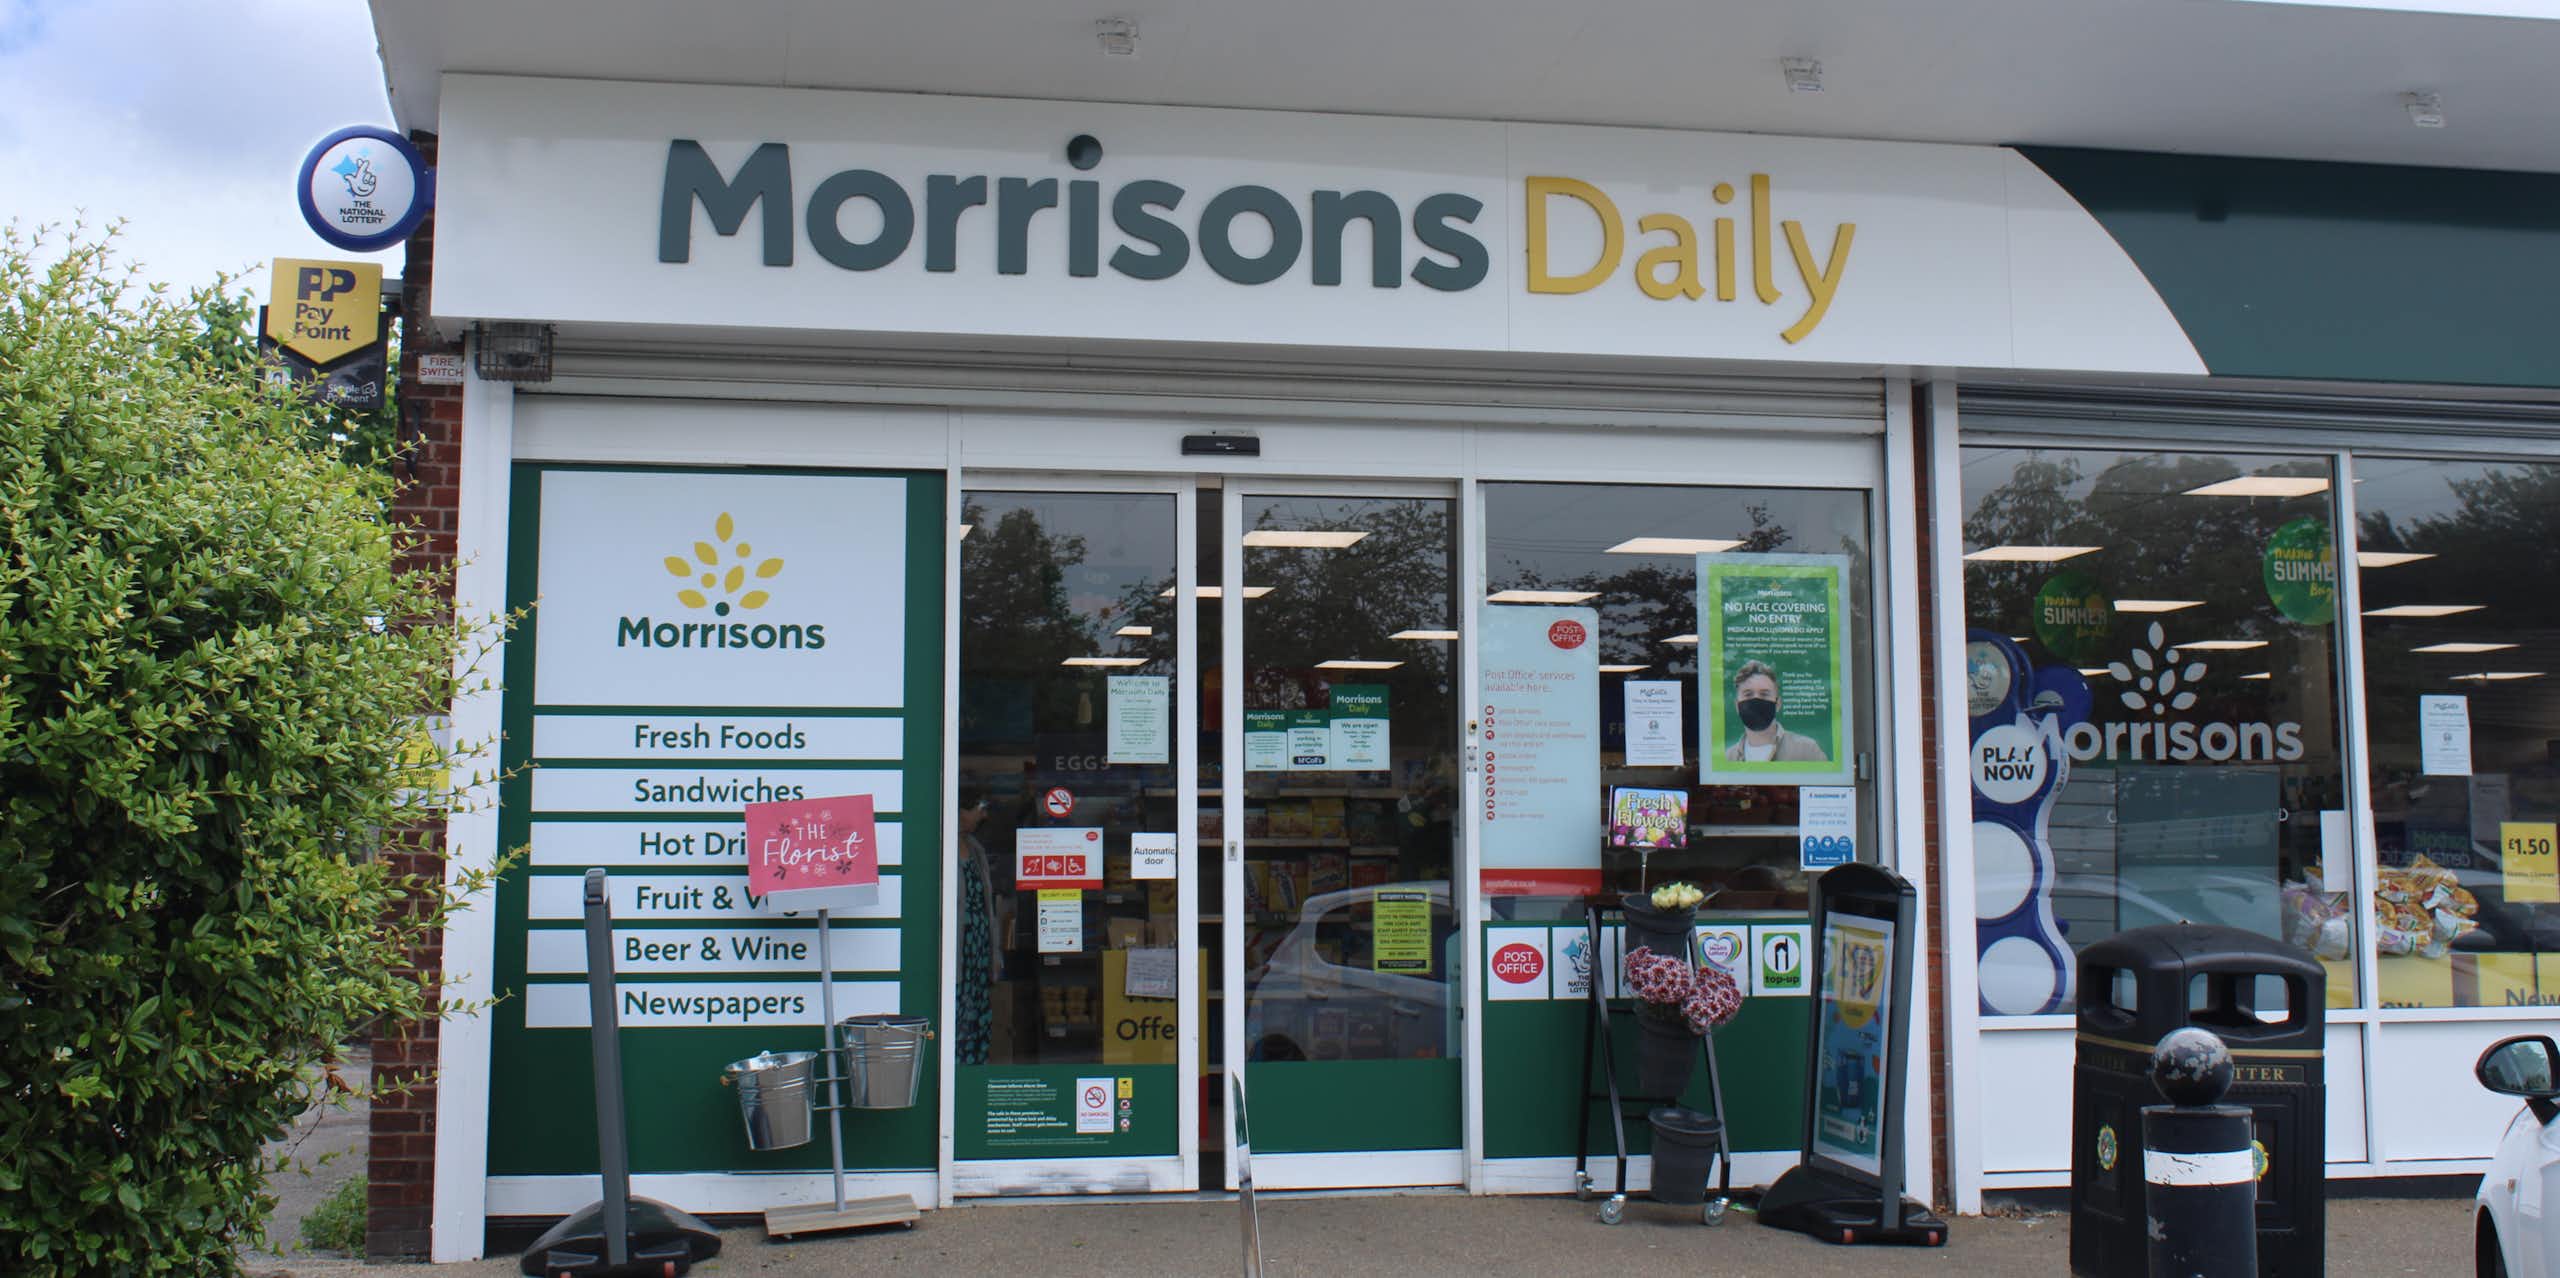 The front of a Morrisons Daily store